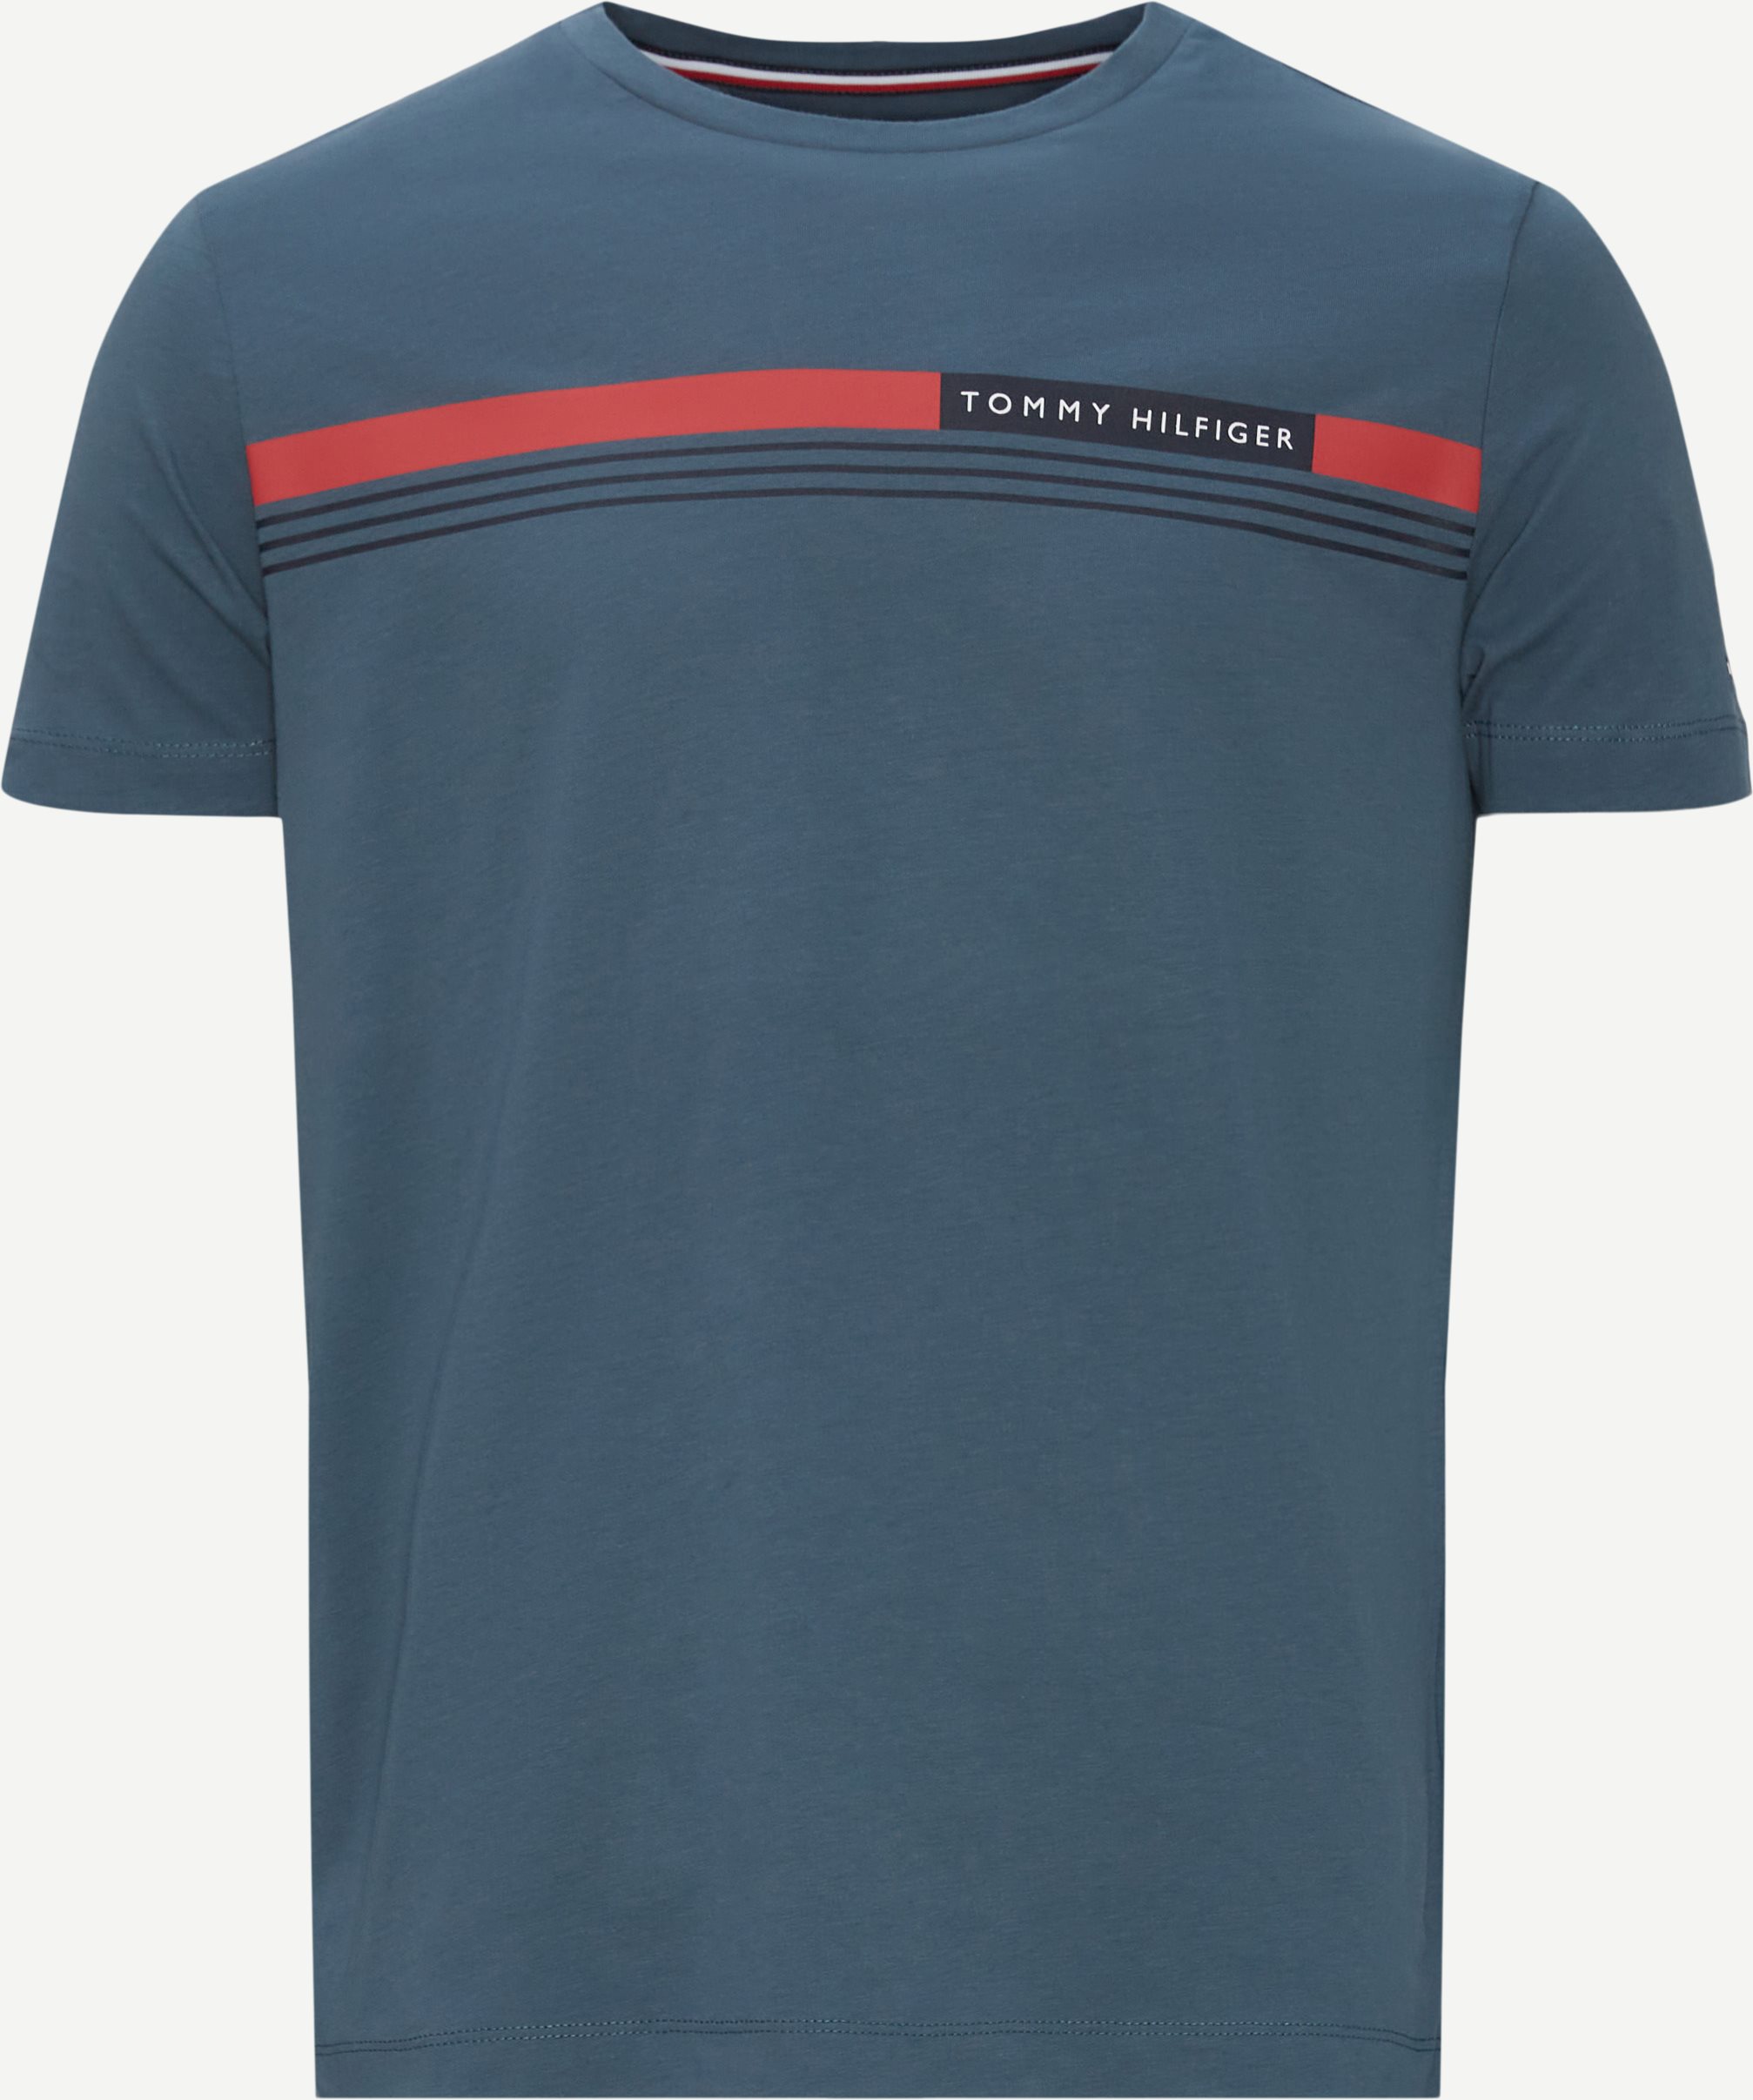 Tommy Hilfiger T-shirts 24558 CORP CHEST FRONT LOGO TEE Blue